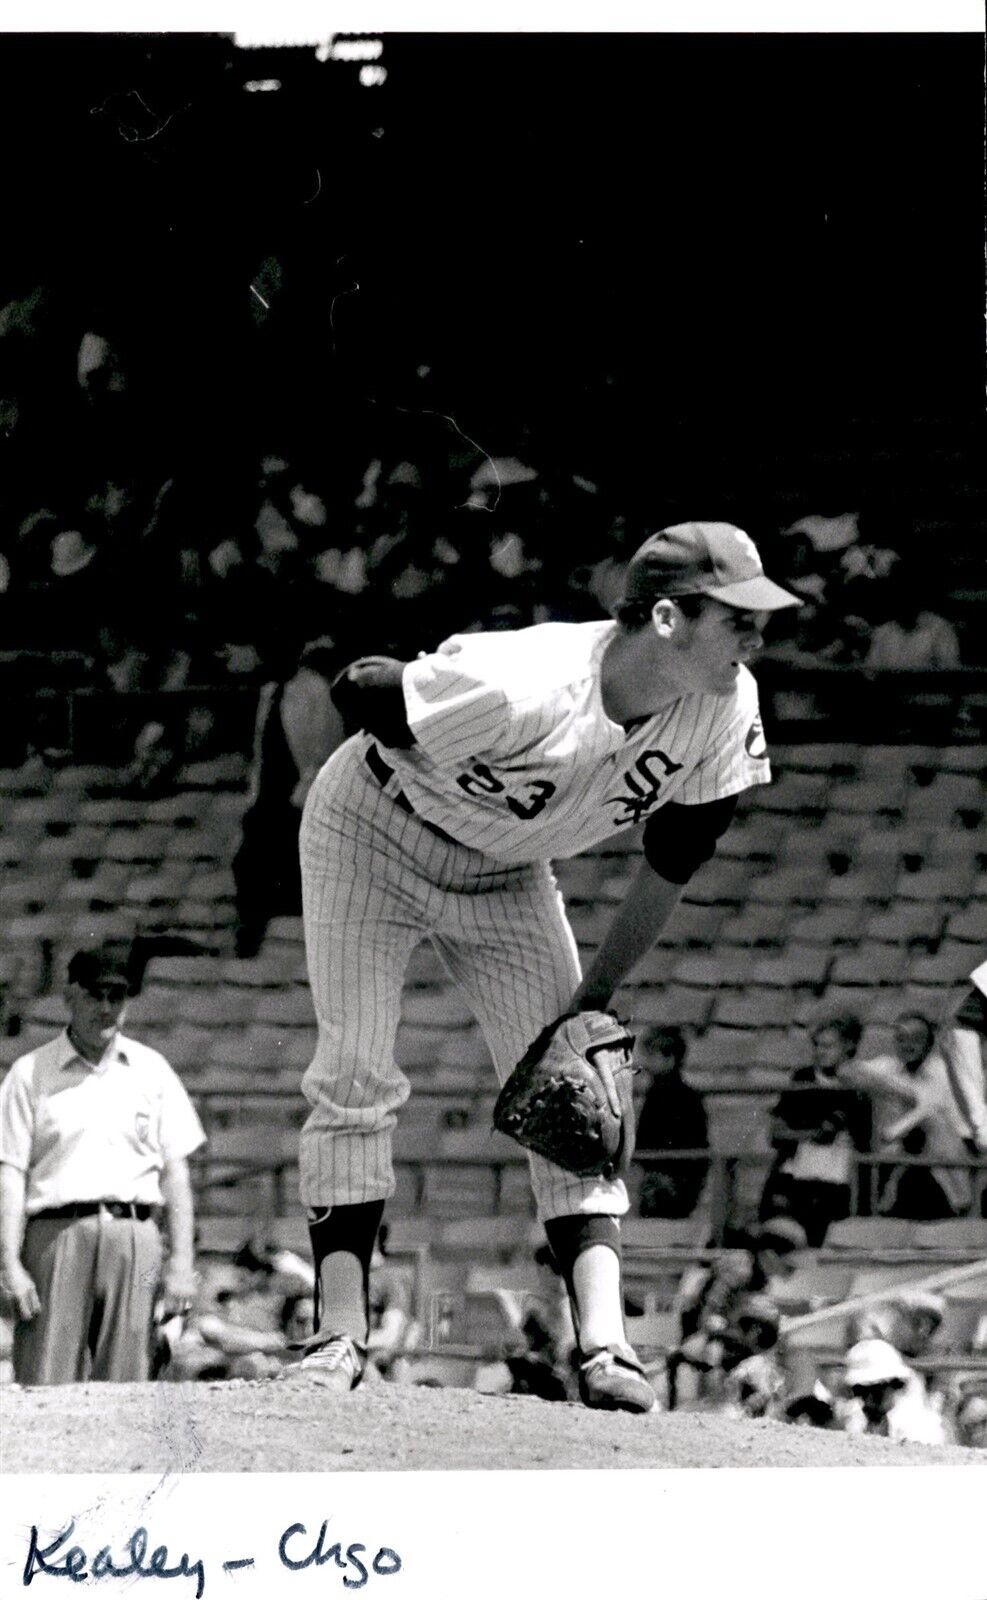 LD324 Orig Ronald Mrowiec Photo STEVE KEALY 1971-73 CHICAGO WHITE SOX PITCHER